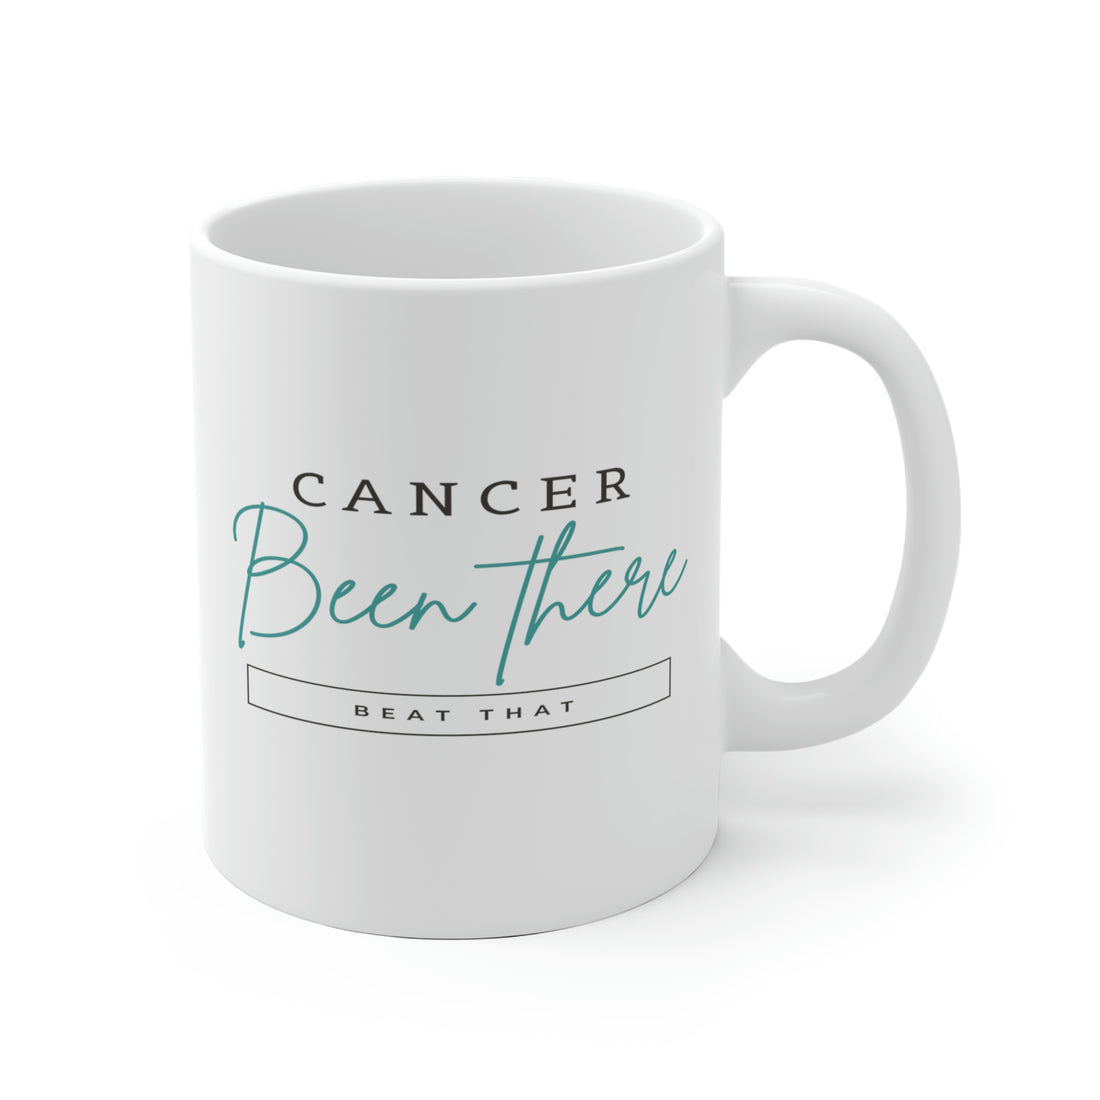 Cancer Been There Beat That - White Ceramic Mug 2 sizes Available